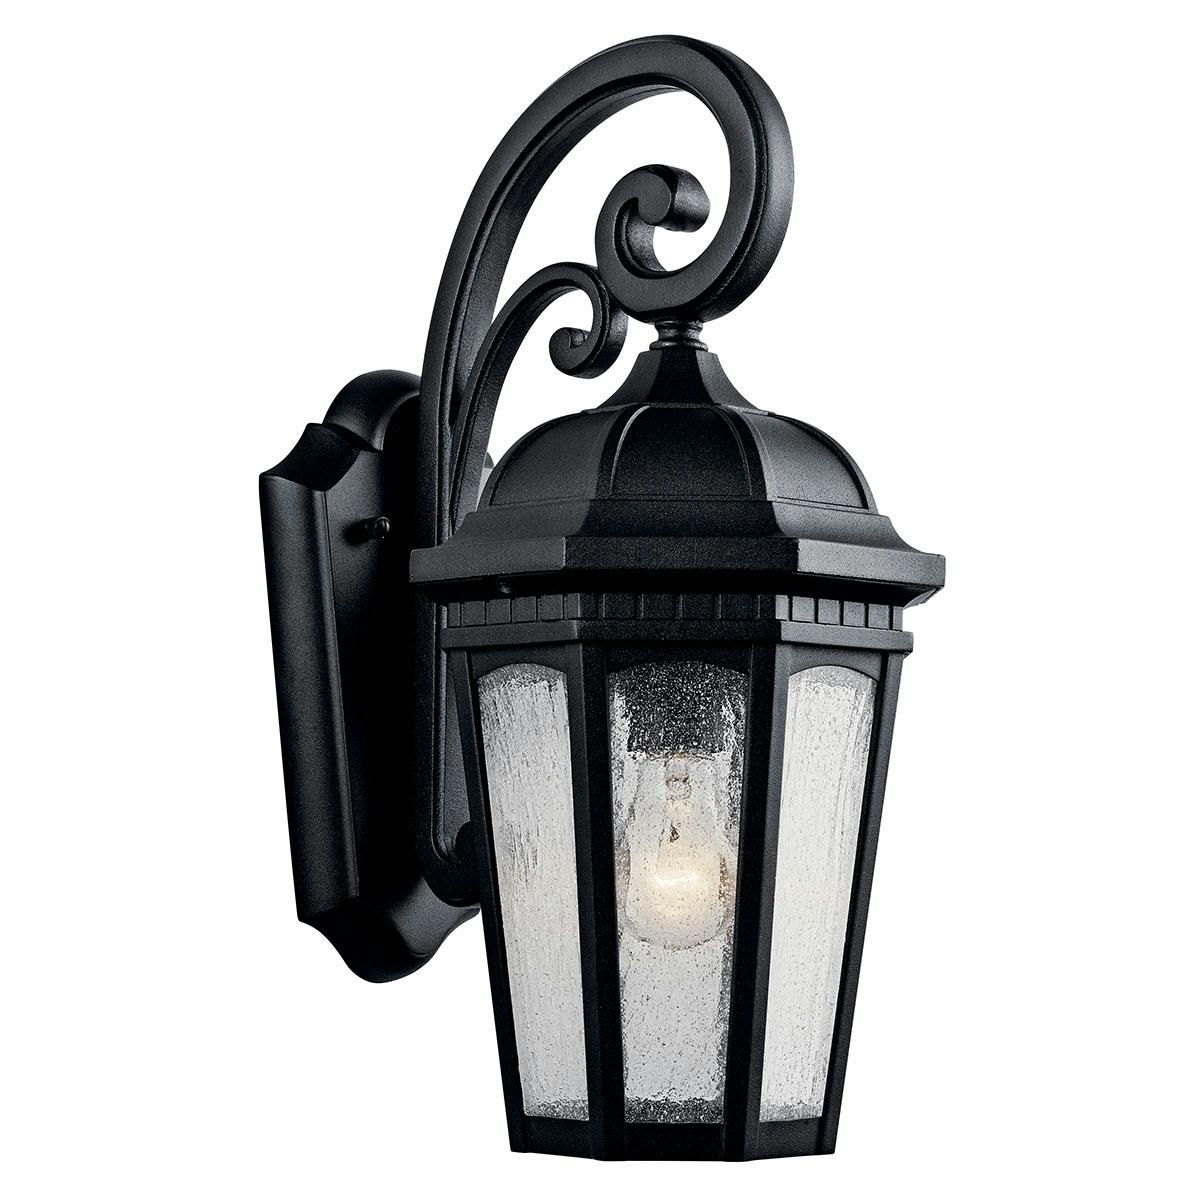 Courtyard 17.75" Wall Light Black on a white background